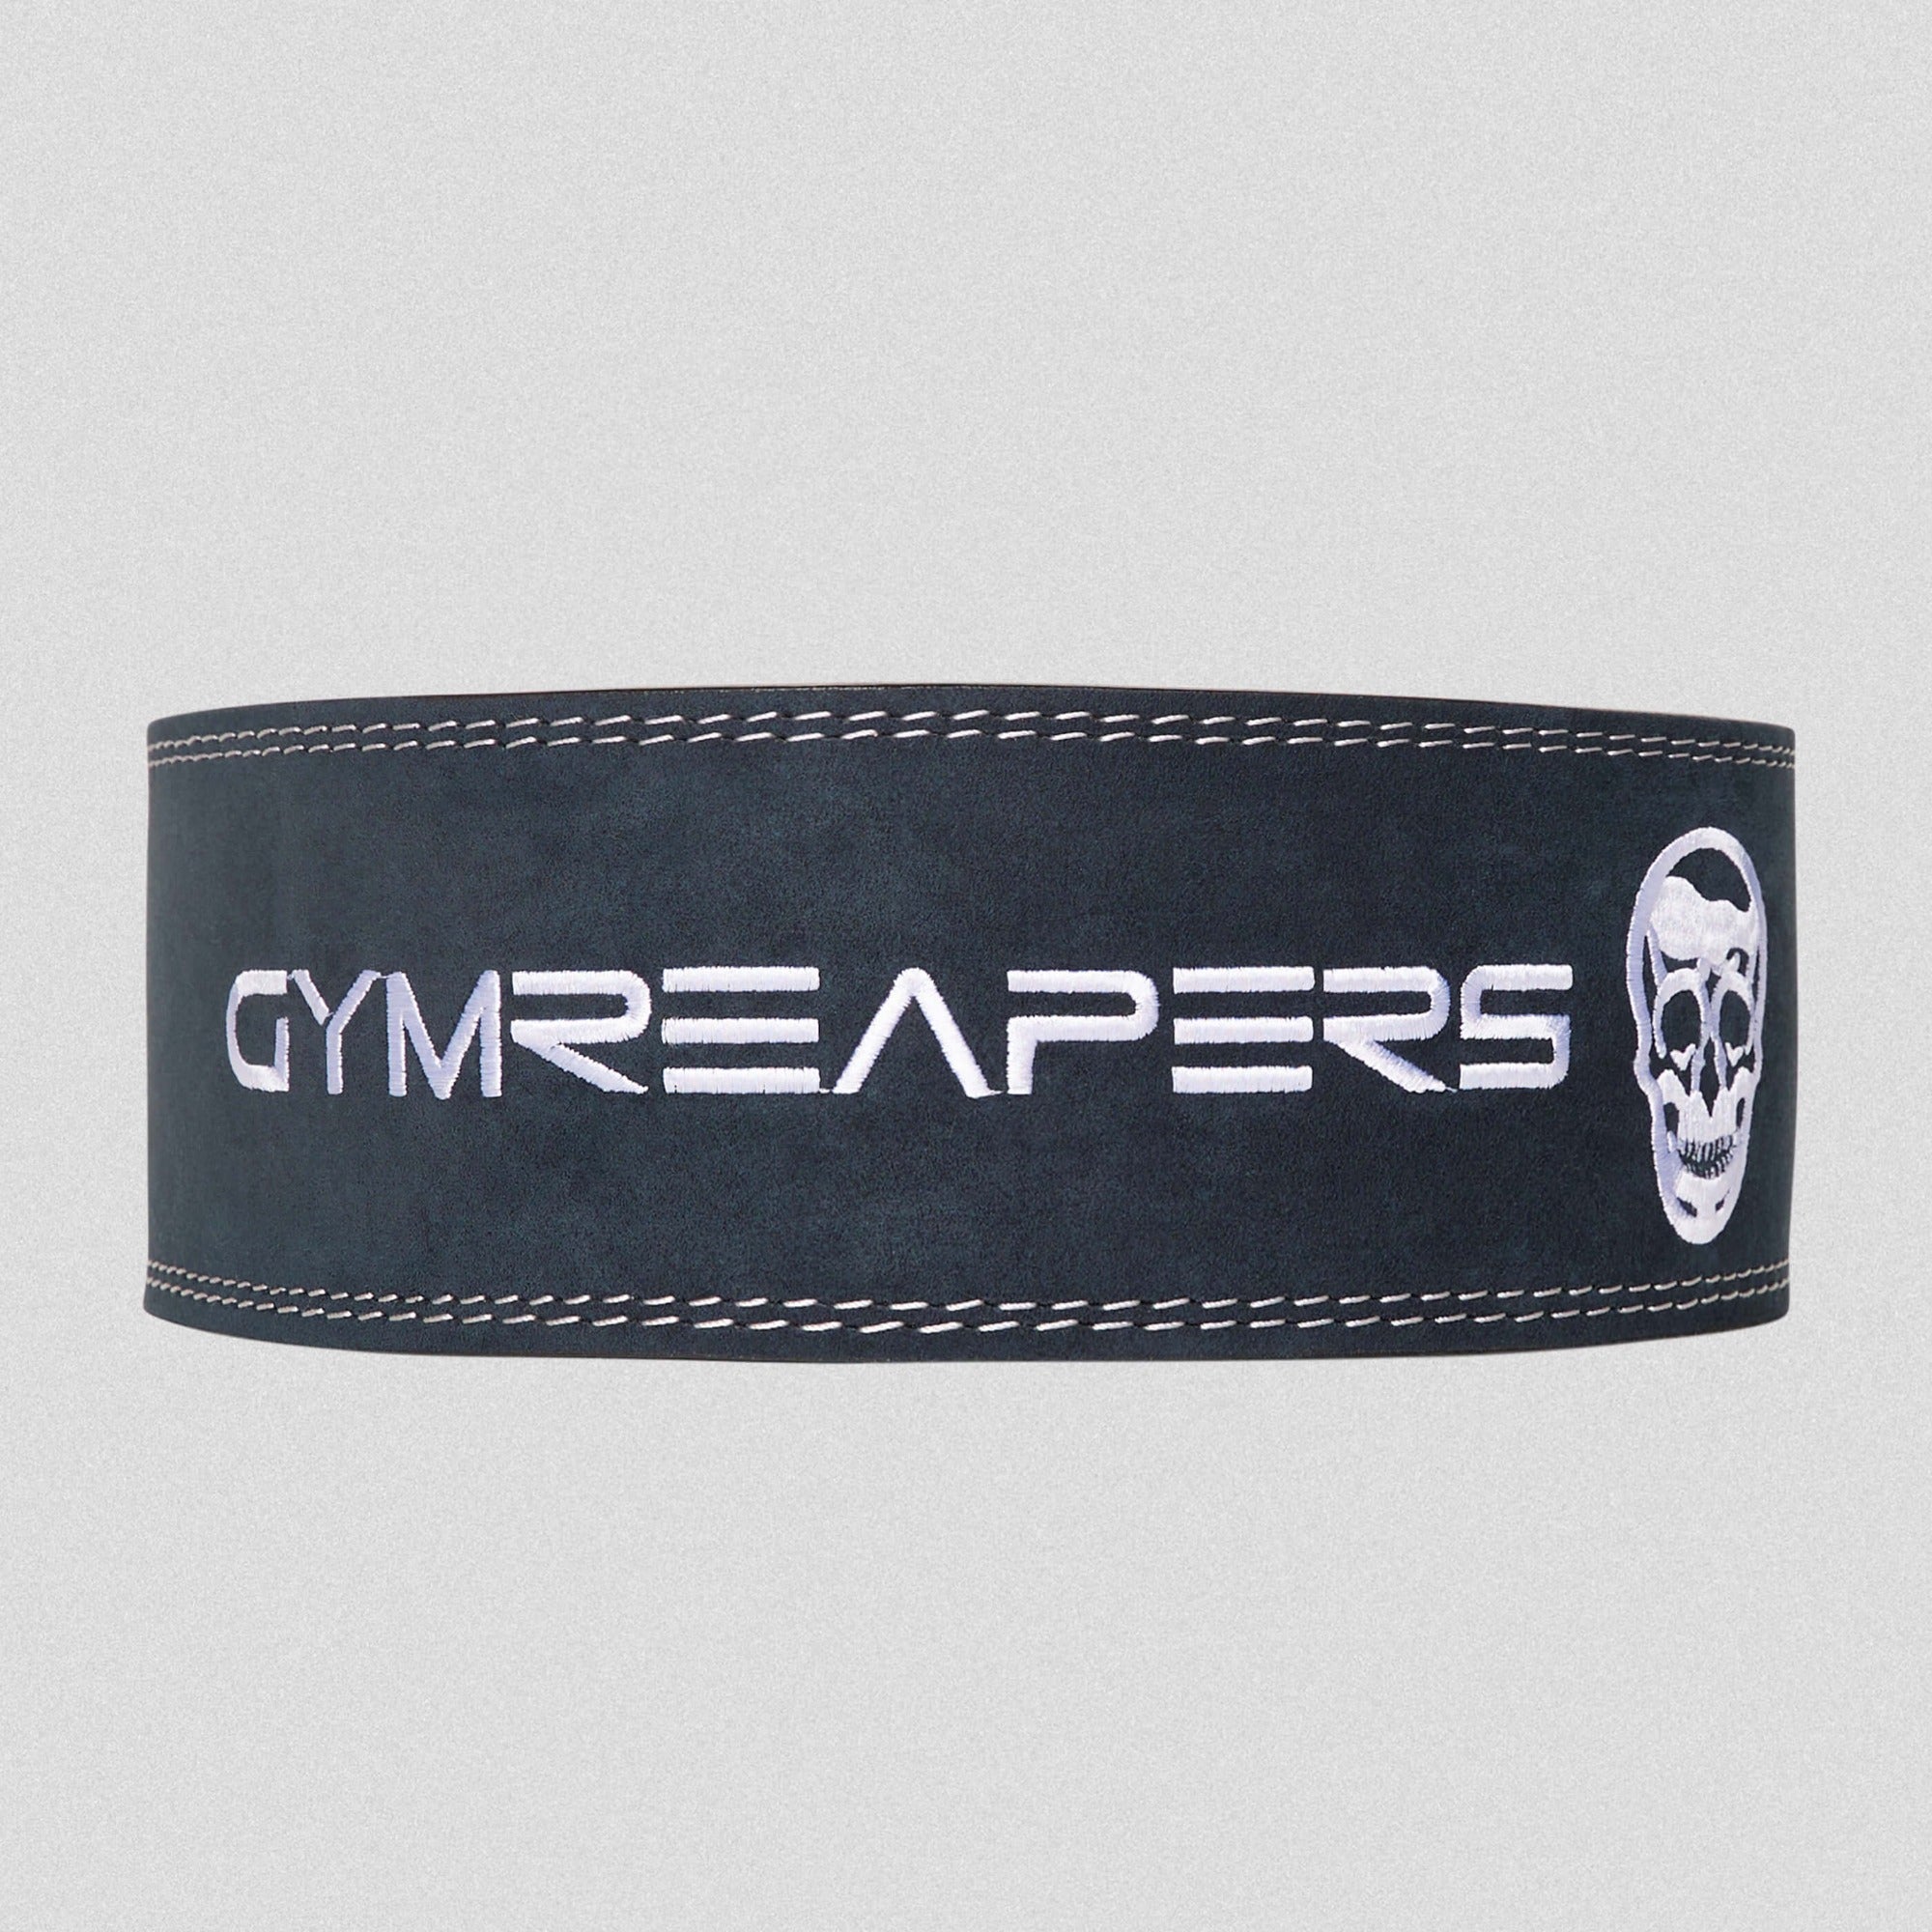 Gymreapers Strength Kit - 10MM White Camo  Wrist wrap, Lifting straps,  Knee sleeves